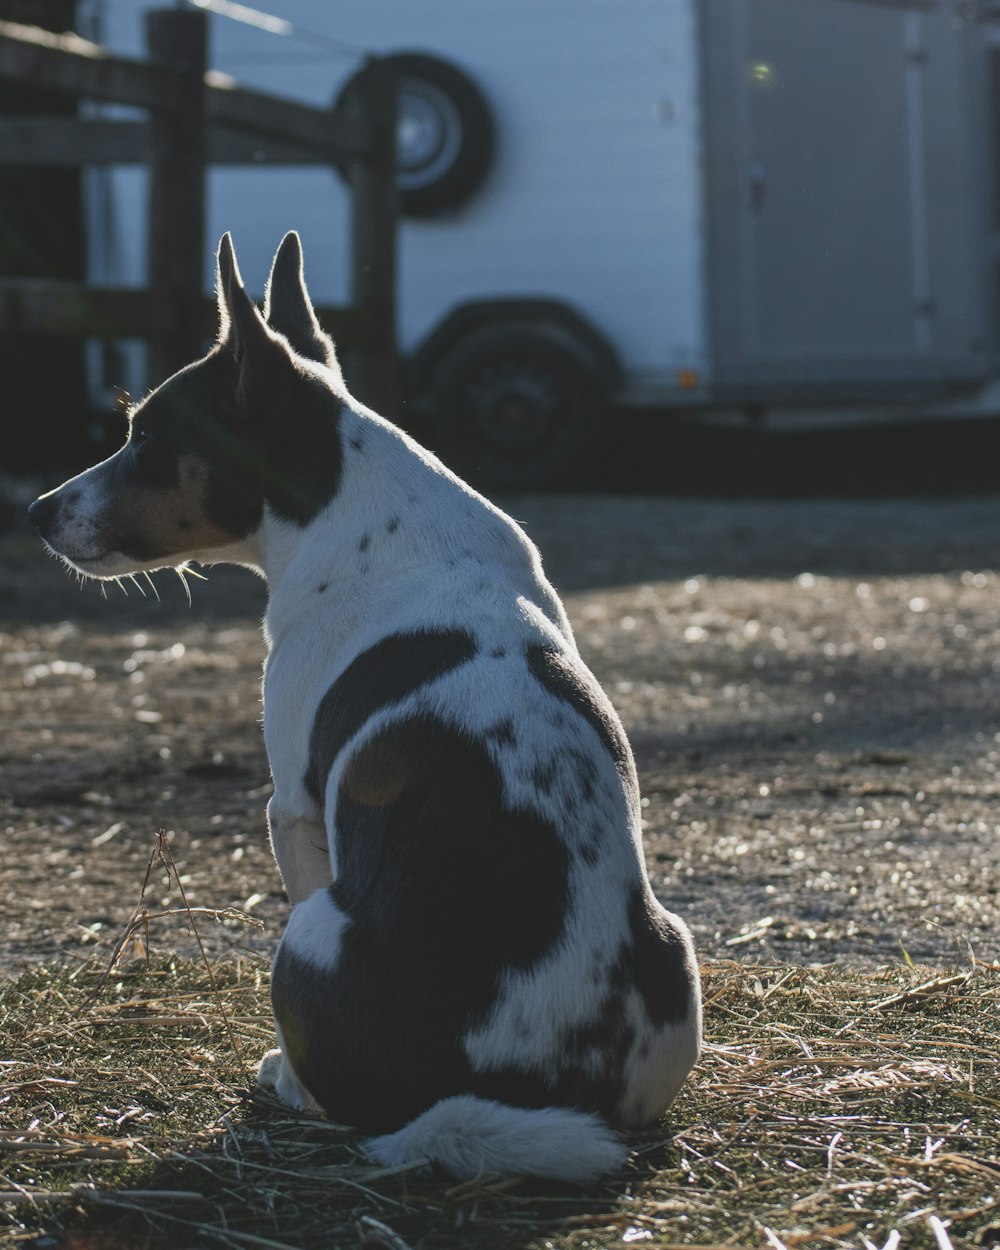 a dog sitting on the ground in front of a trailer